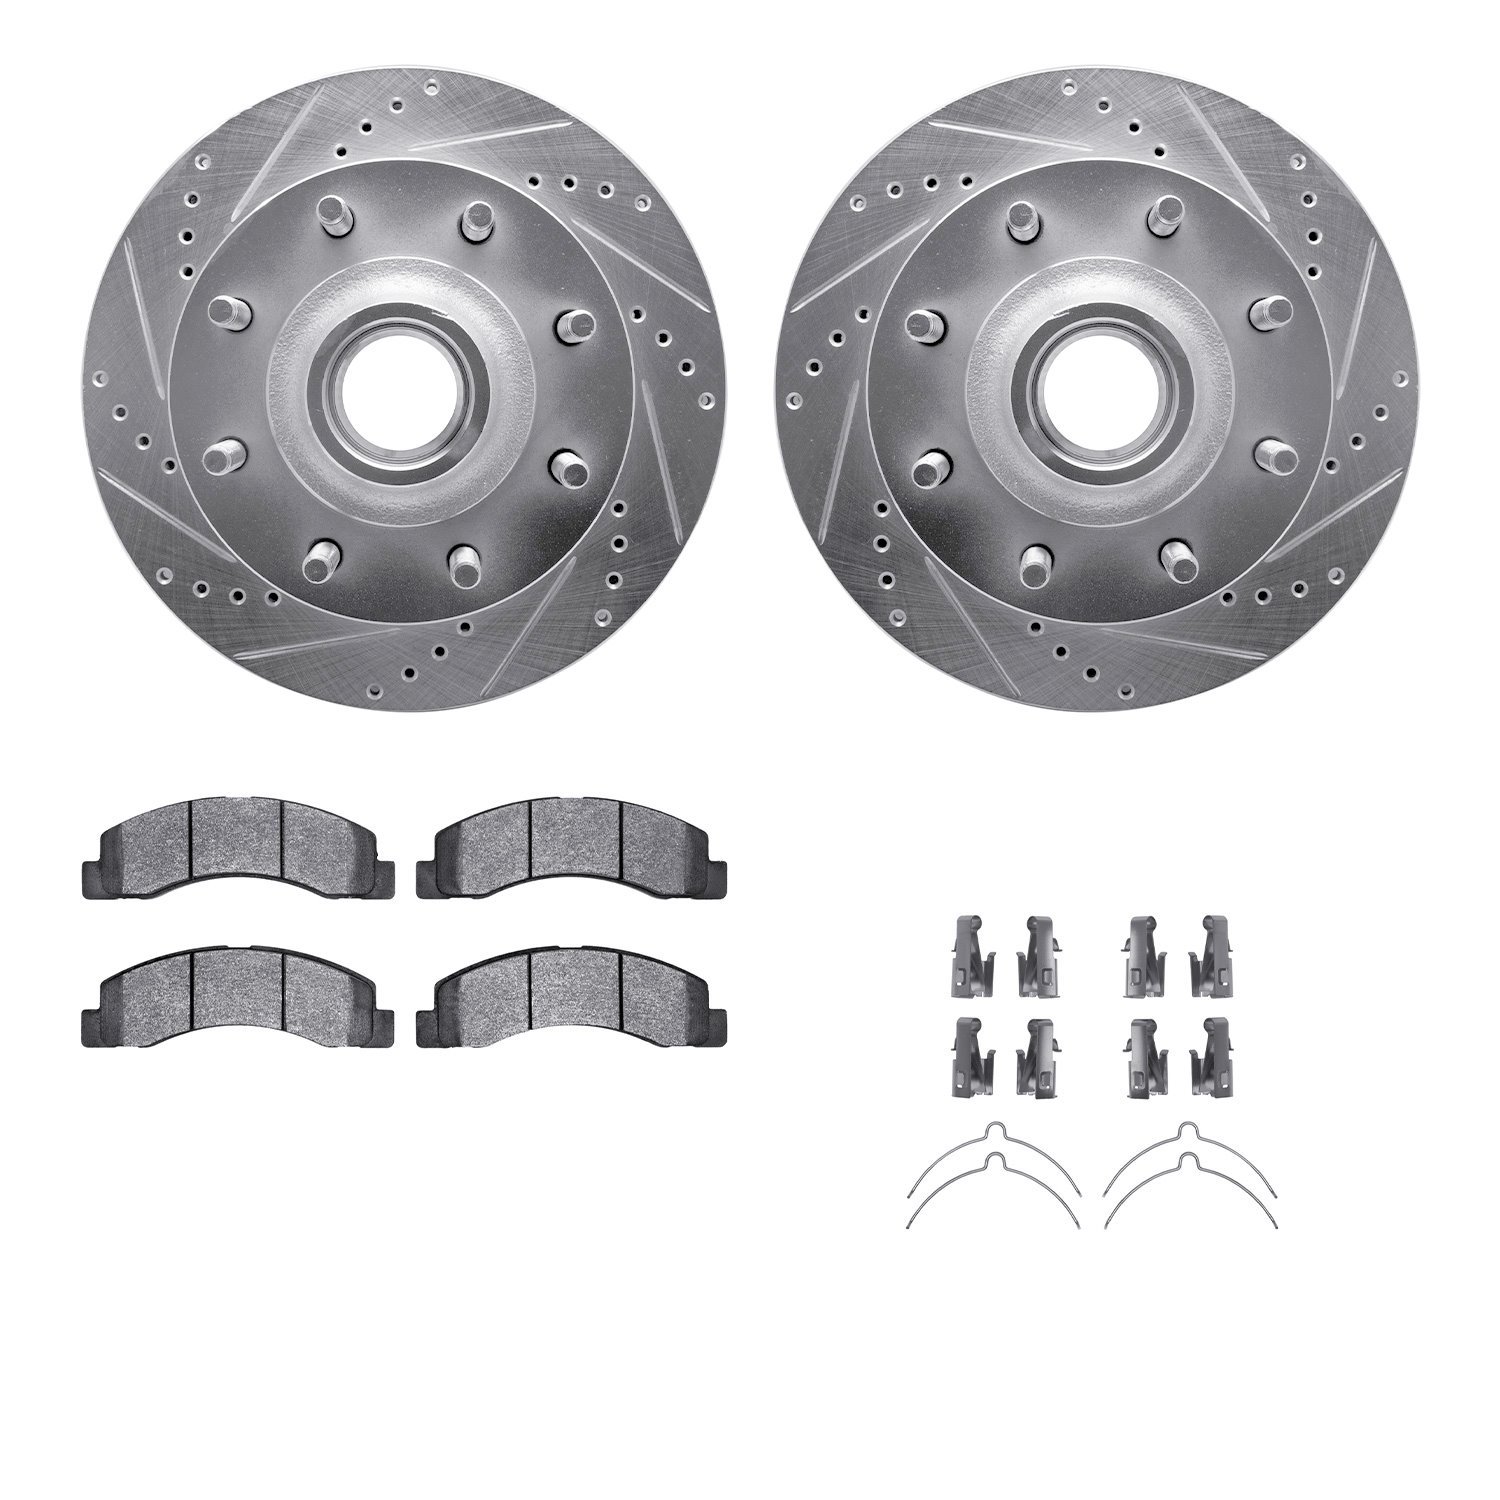 7412-54050 Drilled/Slotted Brake Rotors with Ultimate-Duty Brake Pads Kit & Hardware [Silver], 1999-2002 Ford/Lincoln/Mercury/Ma